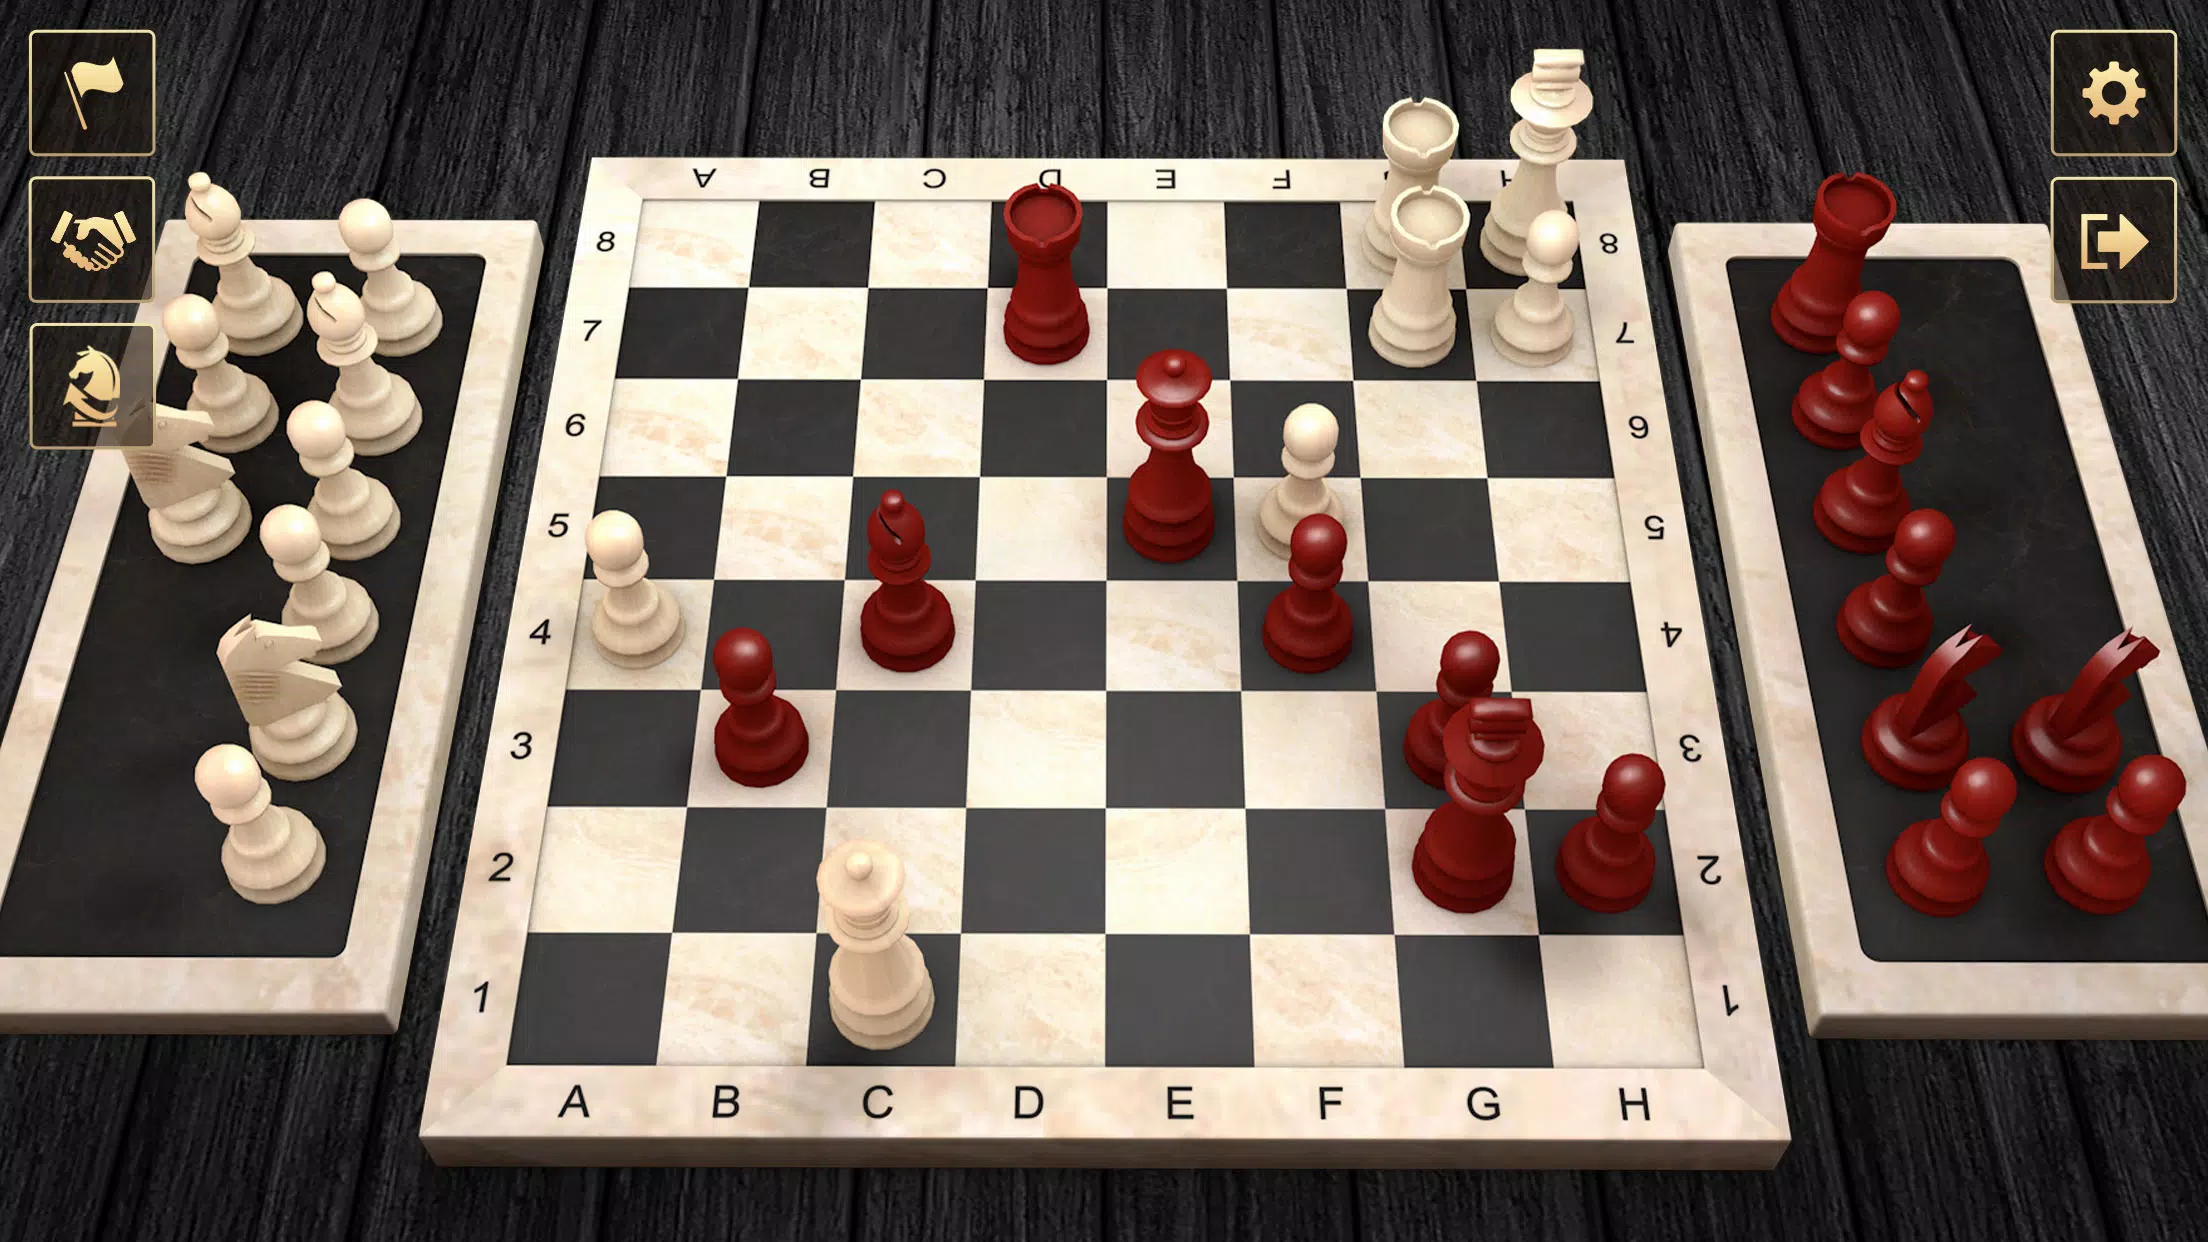 Chess Online Apk Download for Android- Latest version 2.17.3913.1